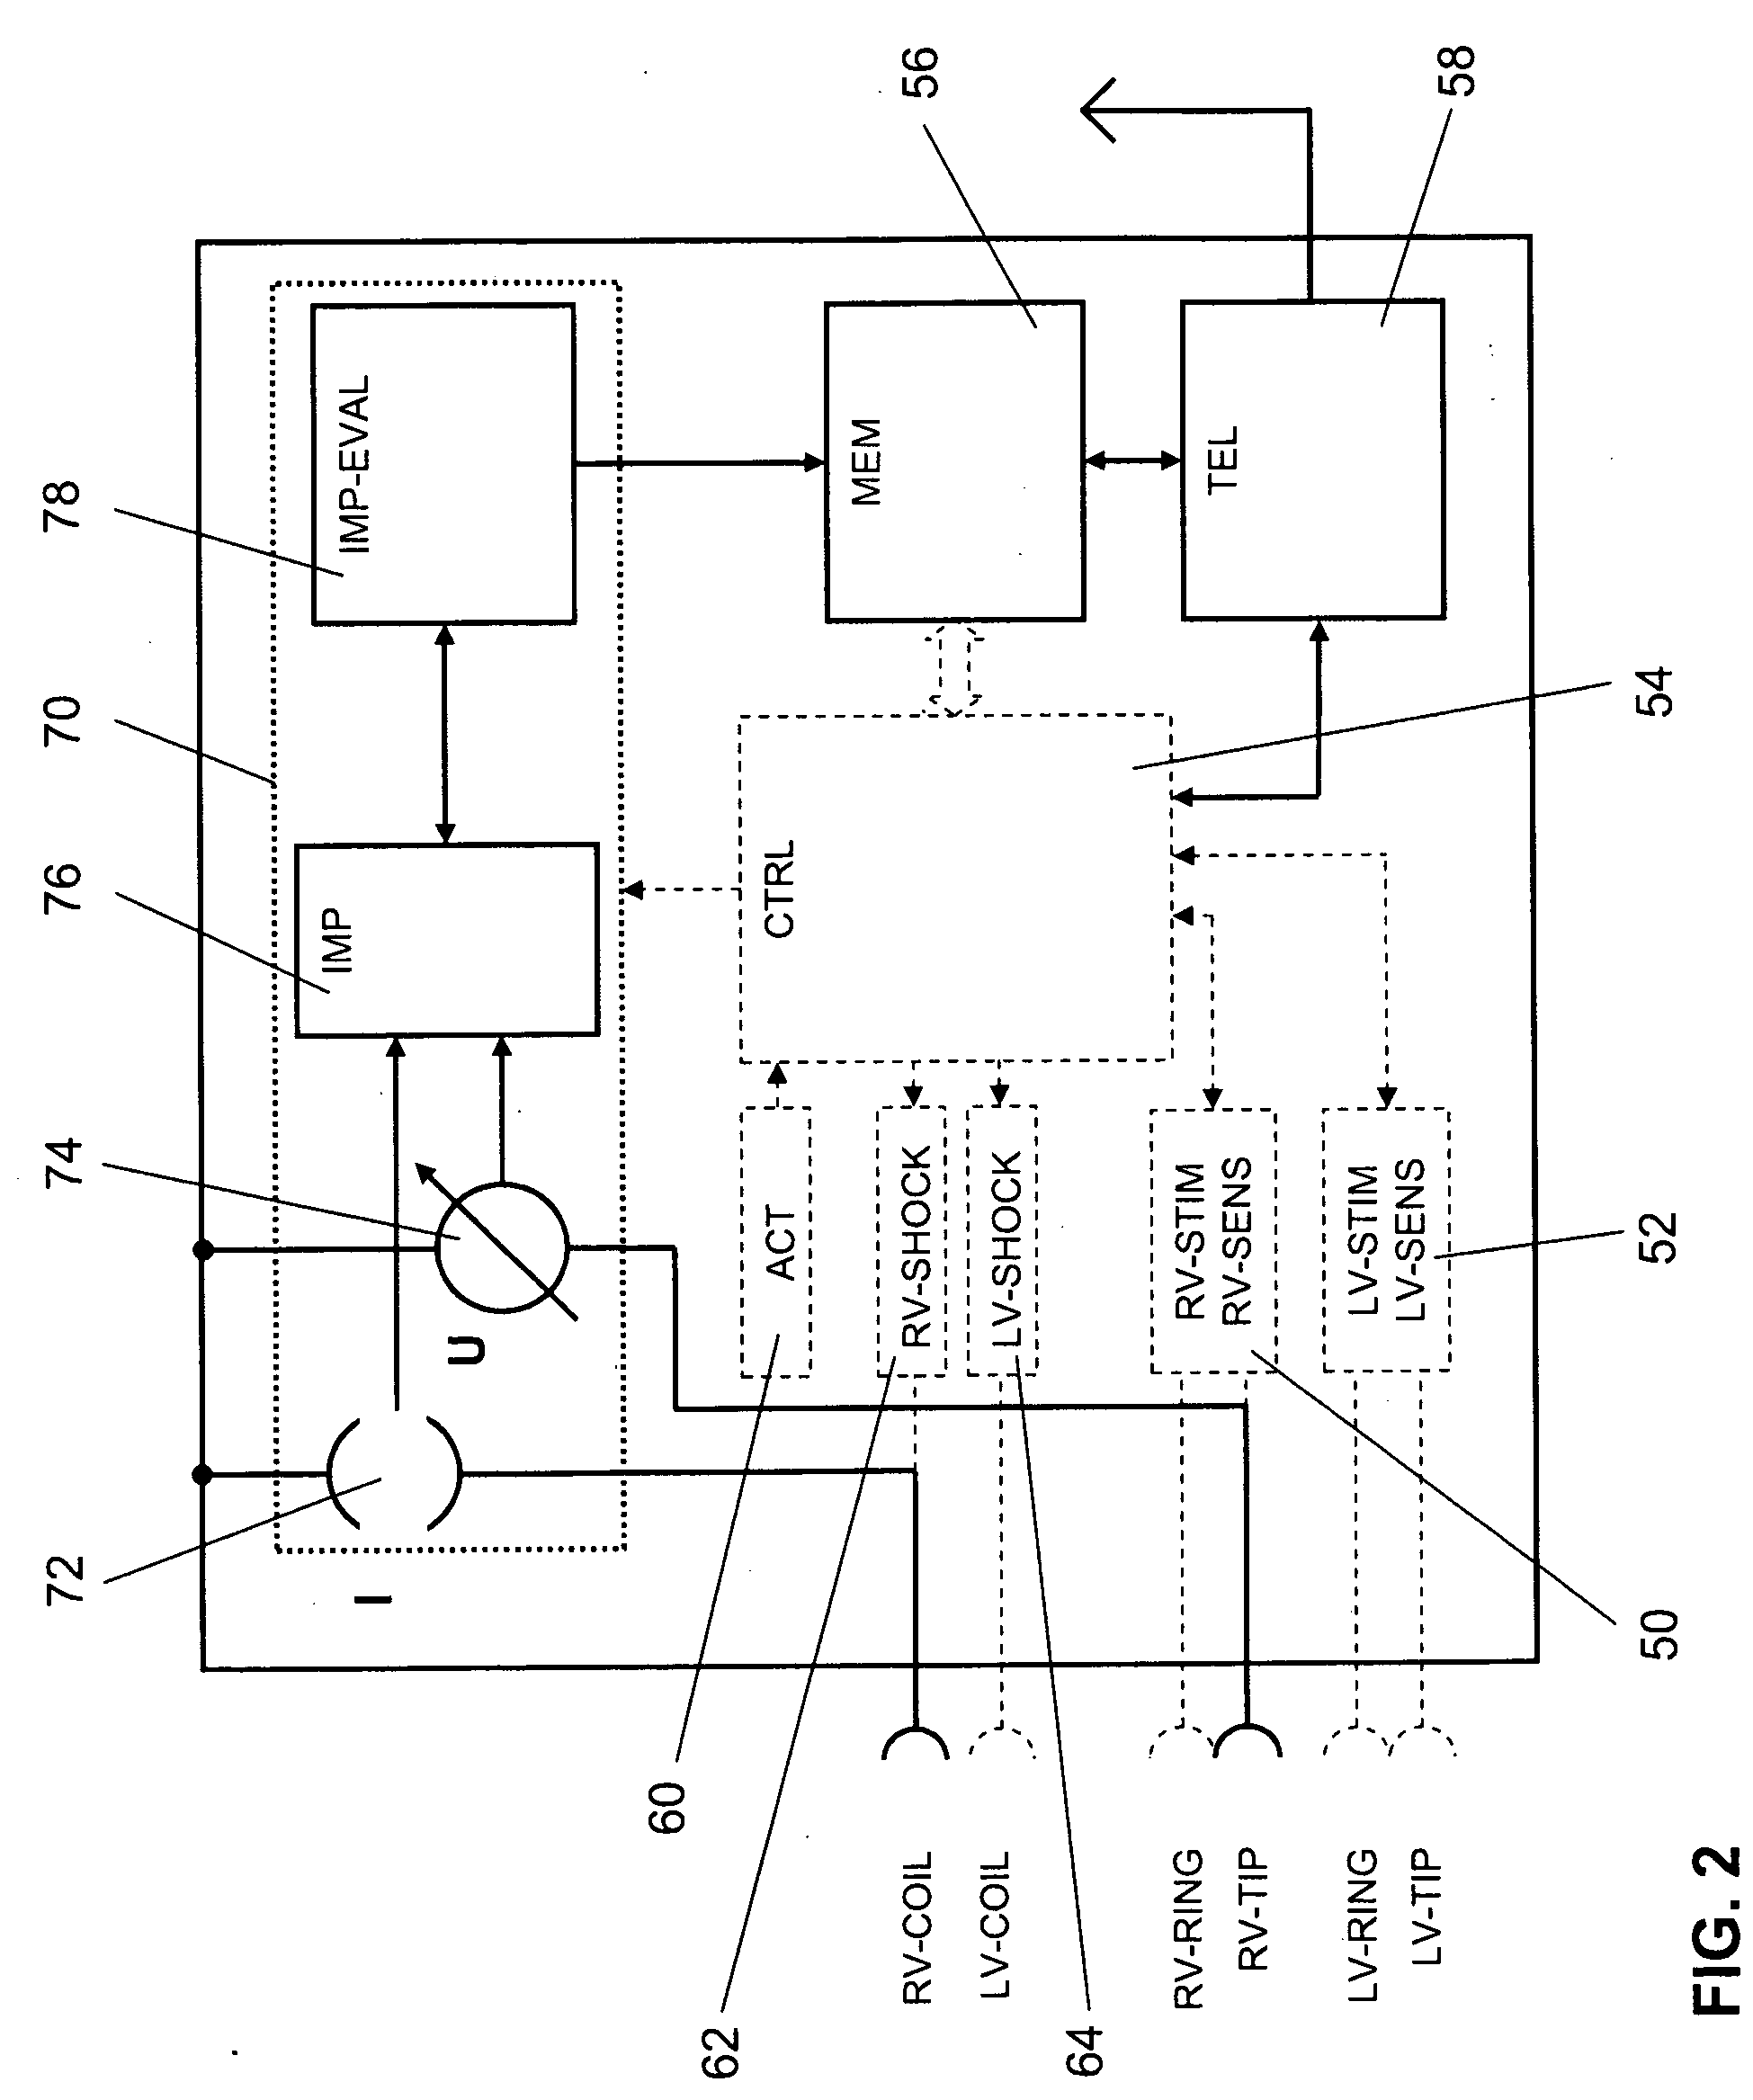 System and method for analyzing an impedance course